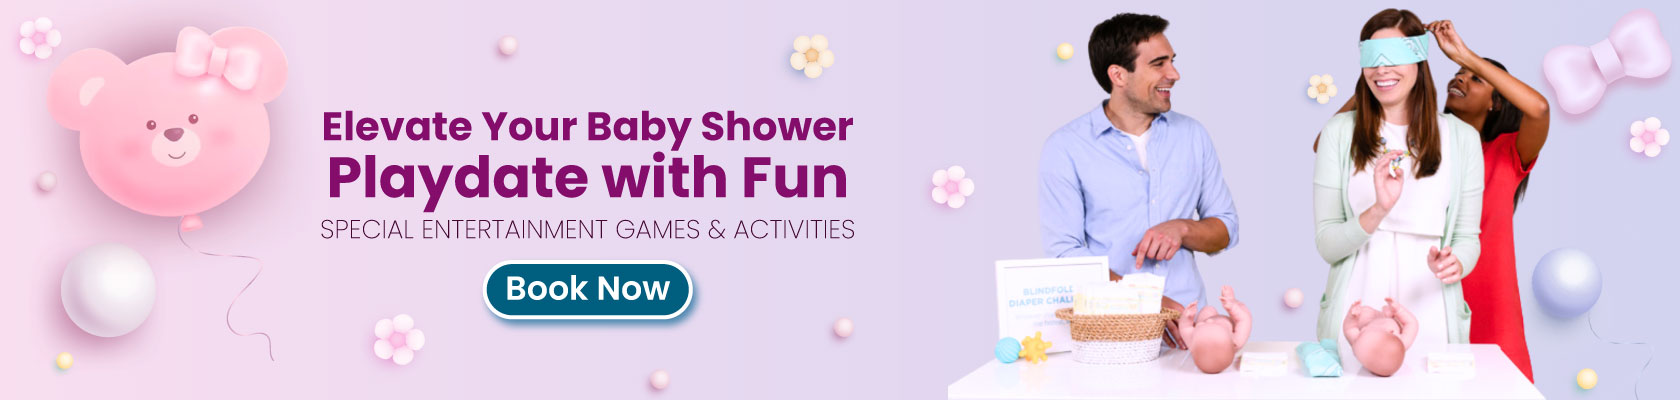 Unique baby shower games and activities